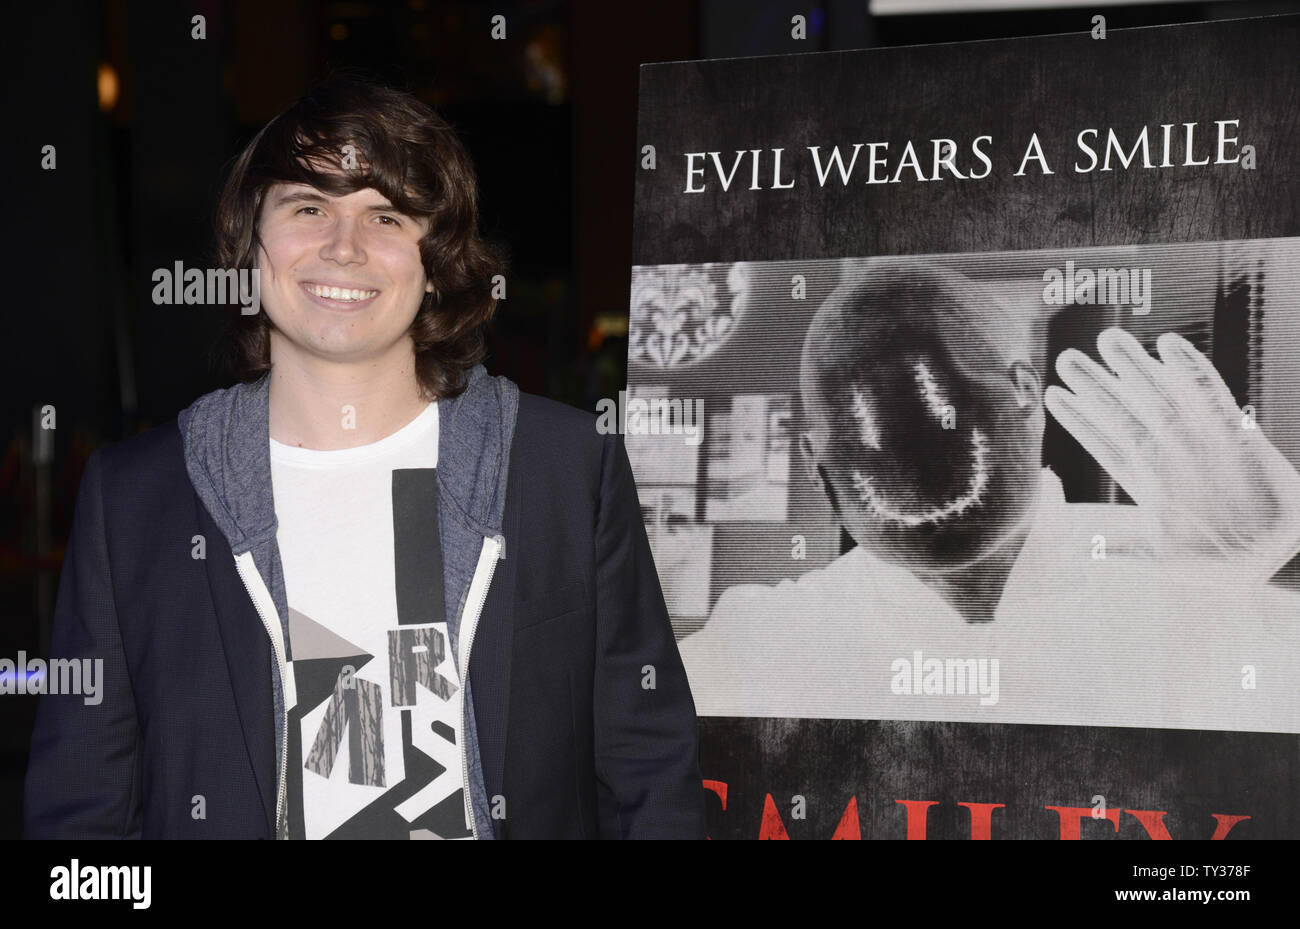 Director Michael Gallagher attends the premiere of the horror film 'Smiley' at the AMC Universal Citywalk Stadium 19 in Los Angeles on October 9, 2012.      UPI/Phil McCarten Stock Photo